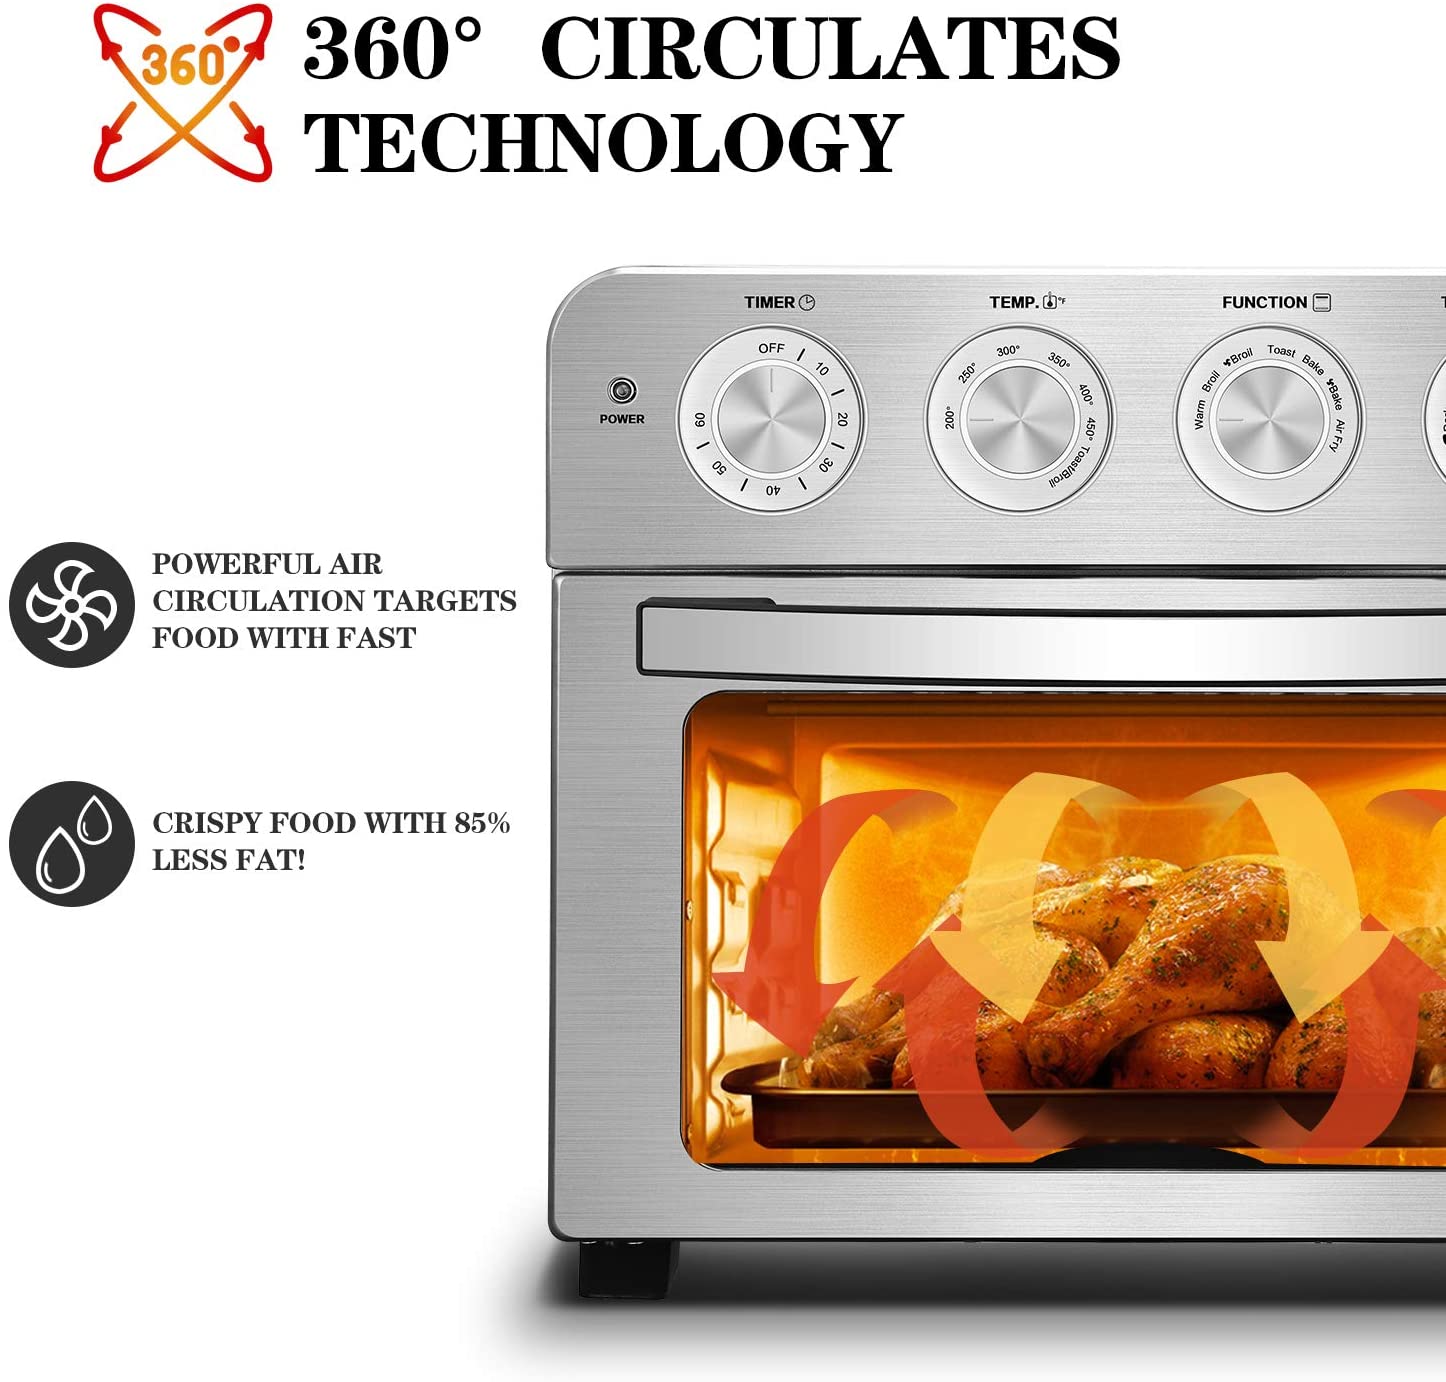 Air Fryer Toaster Oven,24QT Convection Airfryer Countertop Oven,   Fry Oil-Free, Cooking Accessories Included